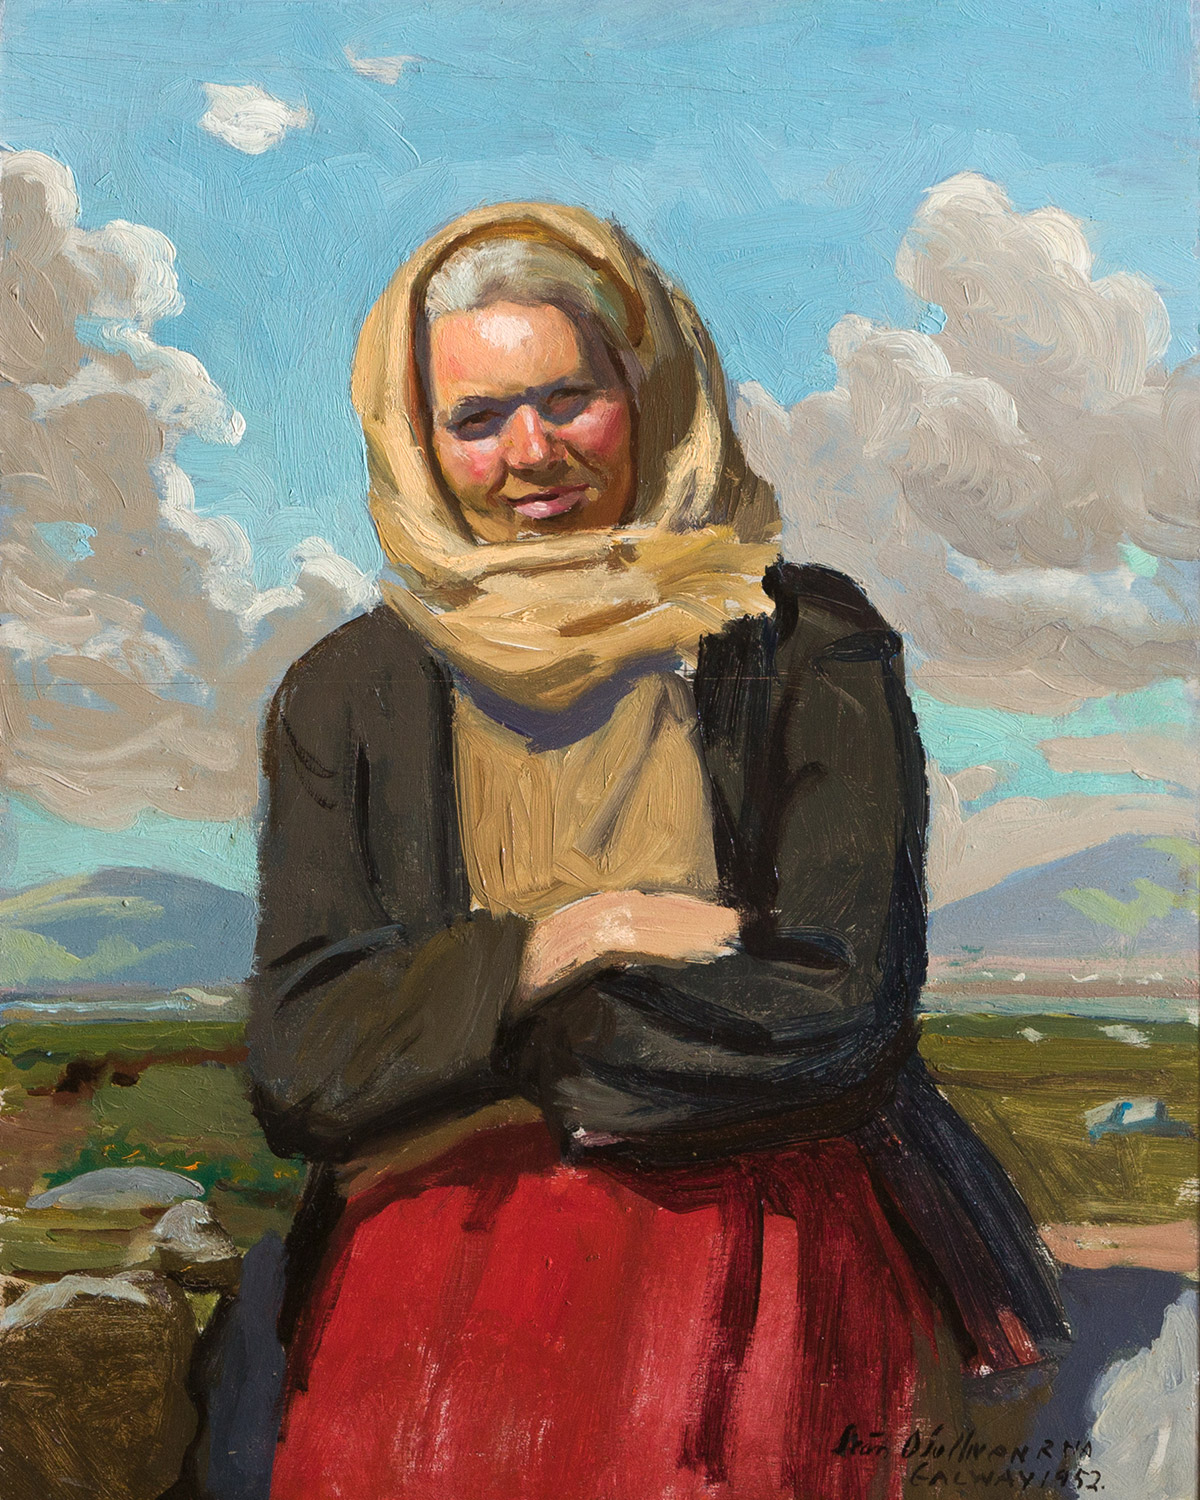 A painted portrait entitled "Connemara Woman with Red Skirt" by the artist Seán O’Sullivan